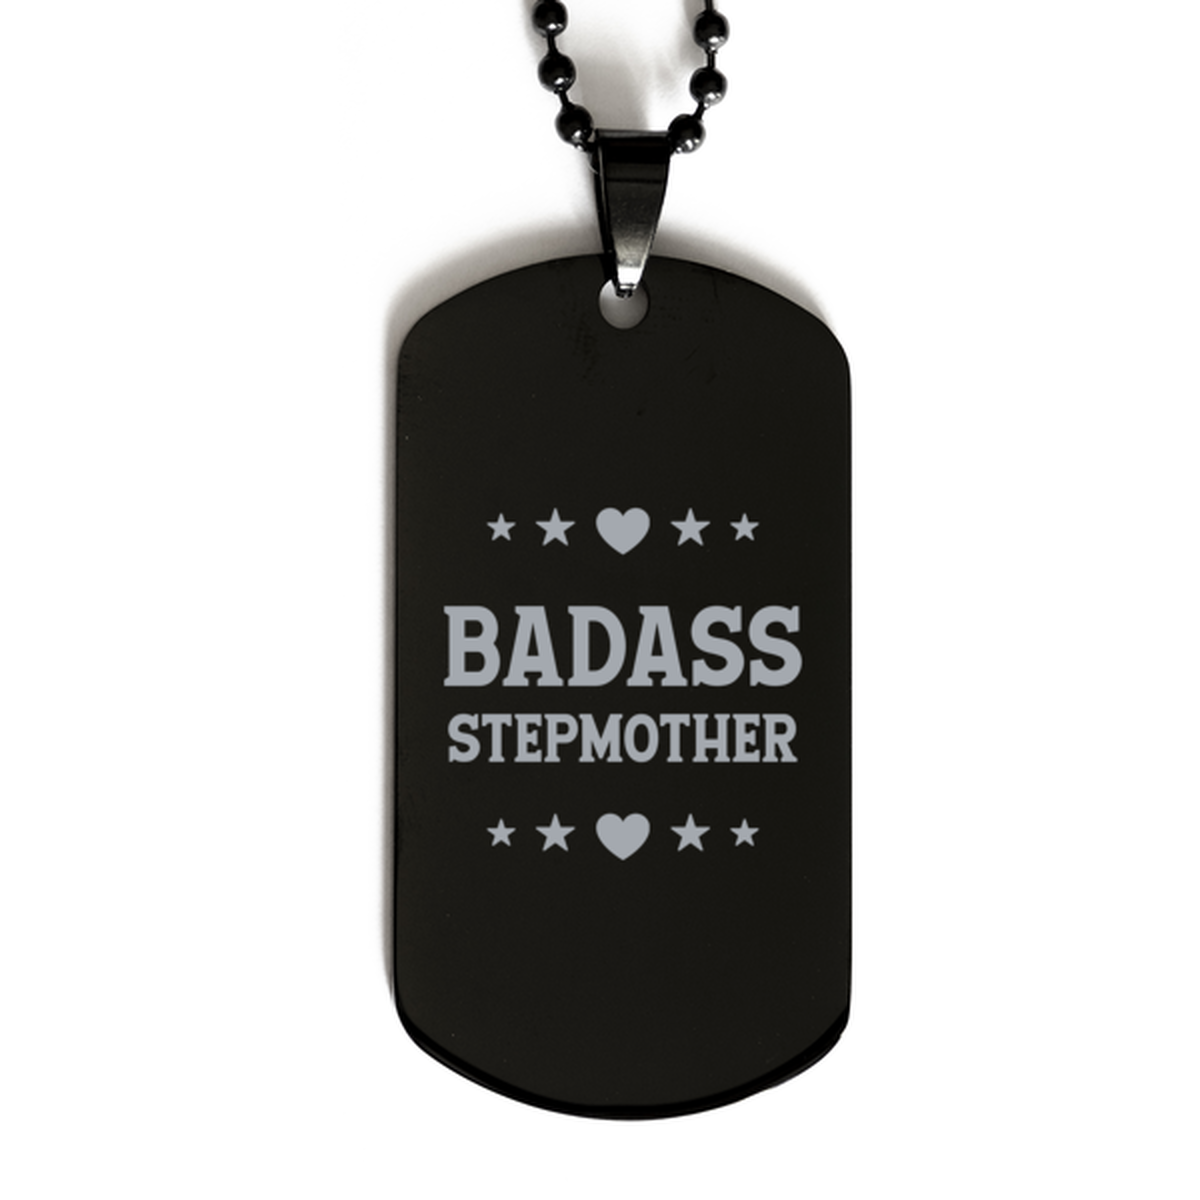 Stepmother Black Dog Tag, Badass Stepmother, Funny Family Gifts  Necklace For Stepmother From Son Daughter